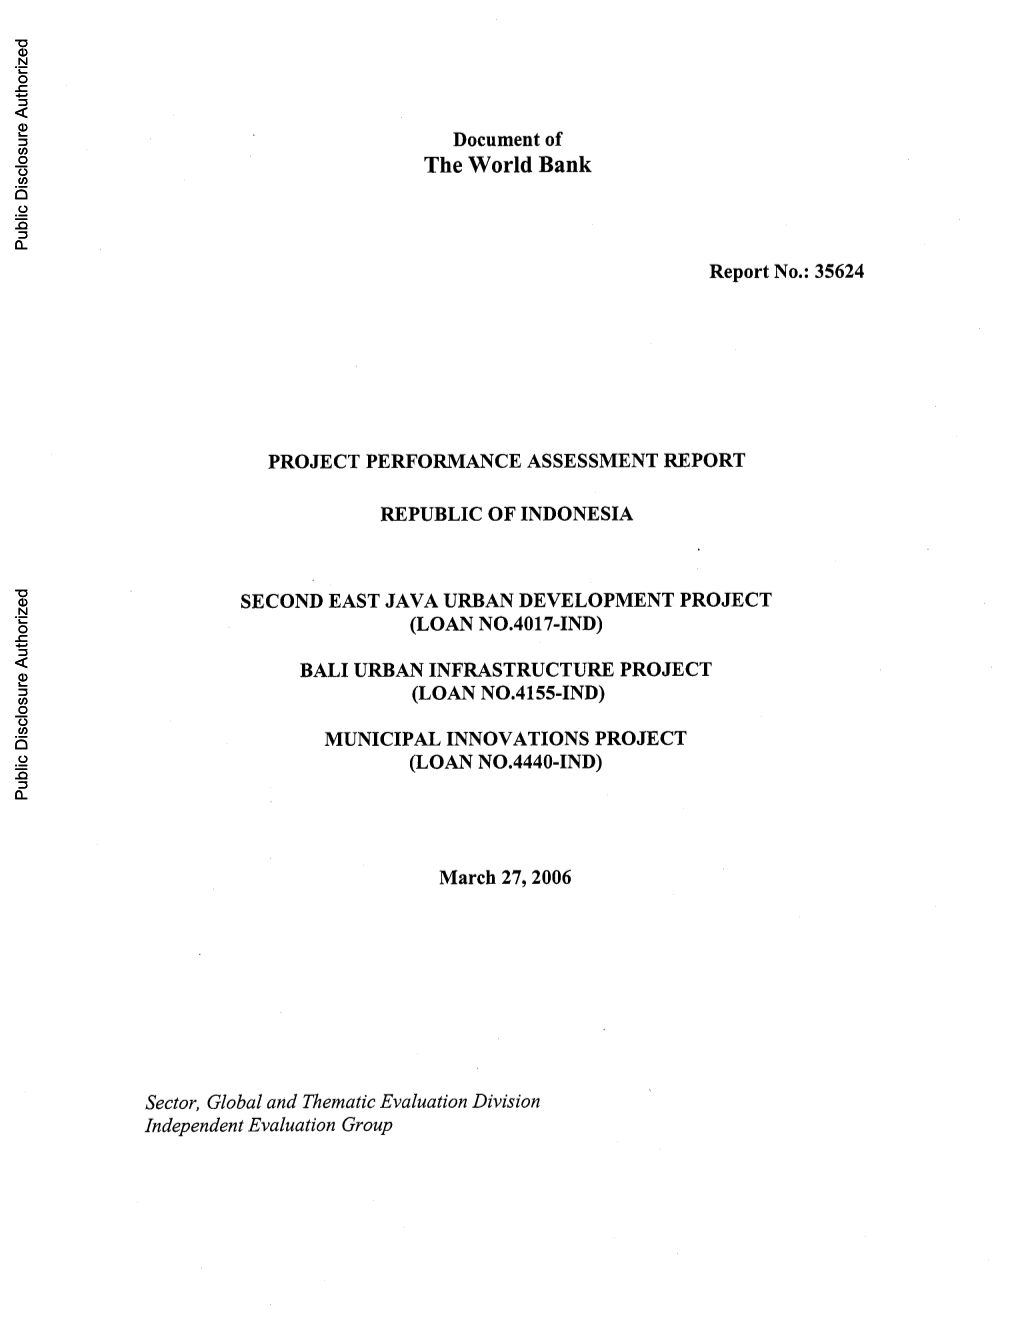 The World Bank Public Disclosure Authorized Report No.: 35624